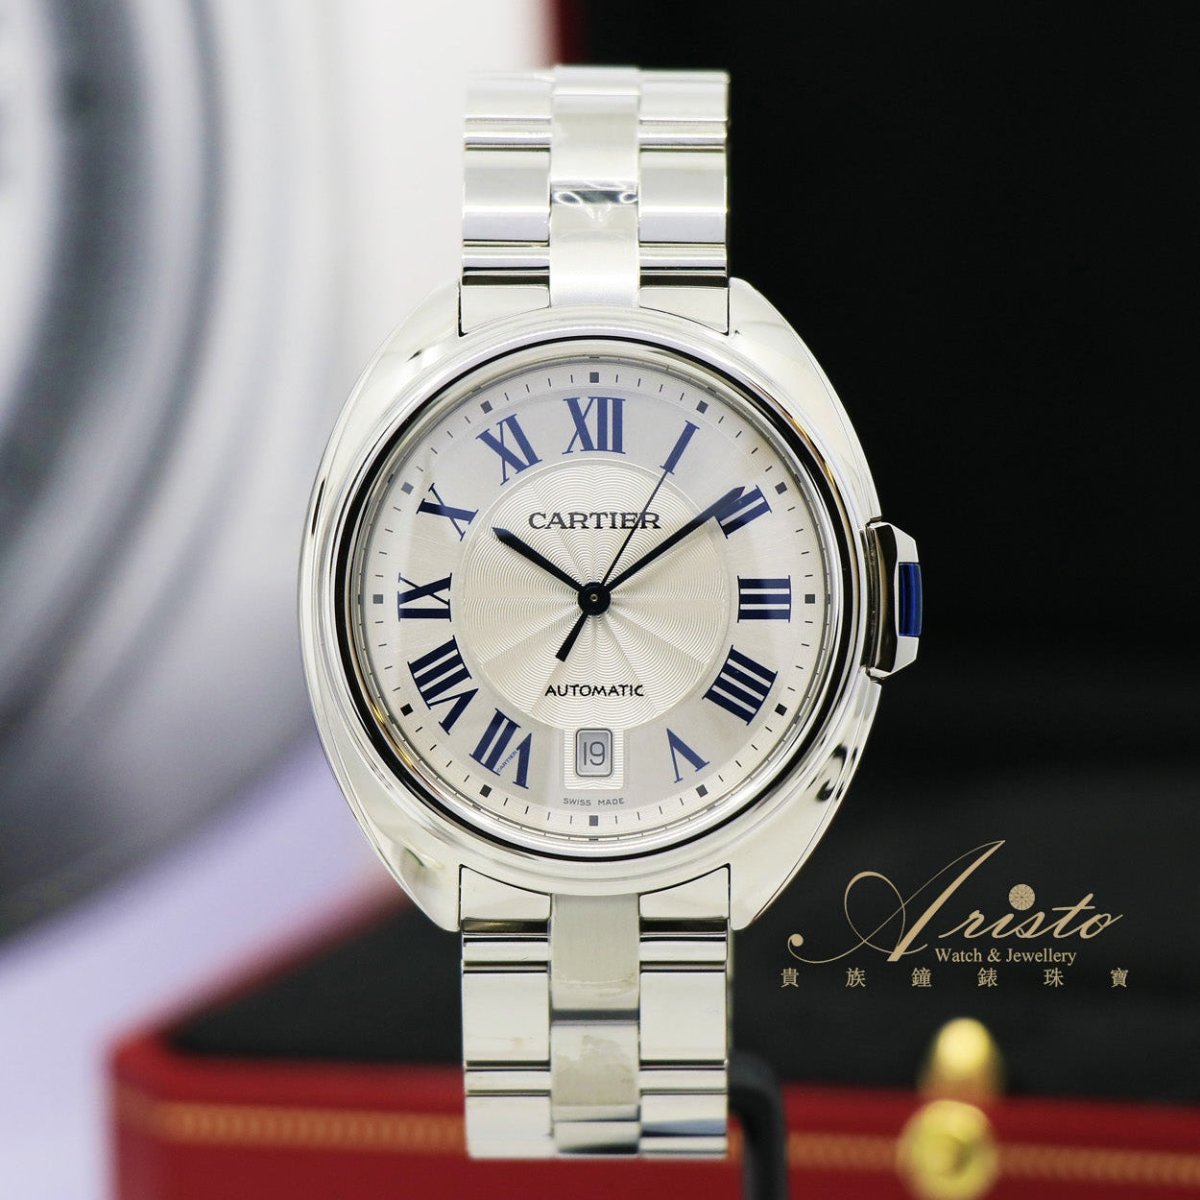 Cartier WSCL0007 CLE- Aristo Watch & Jewellery